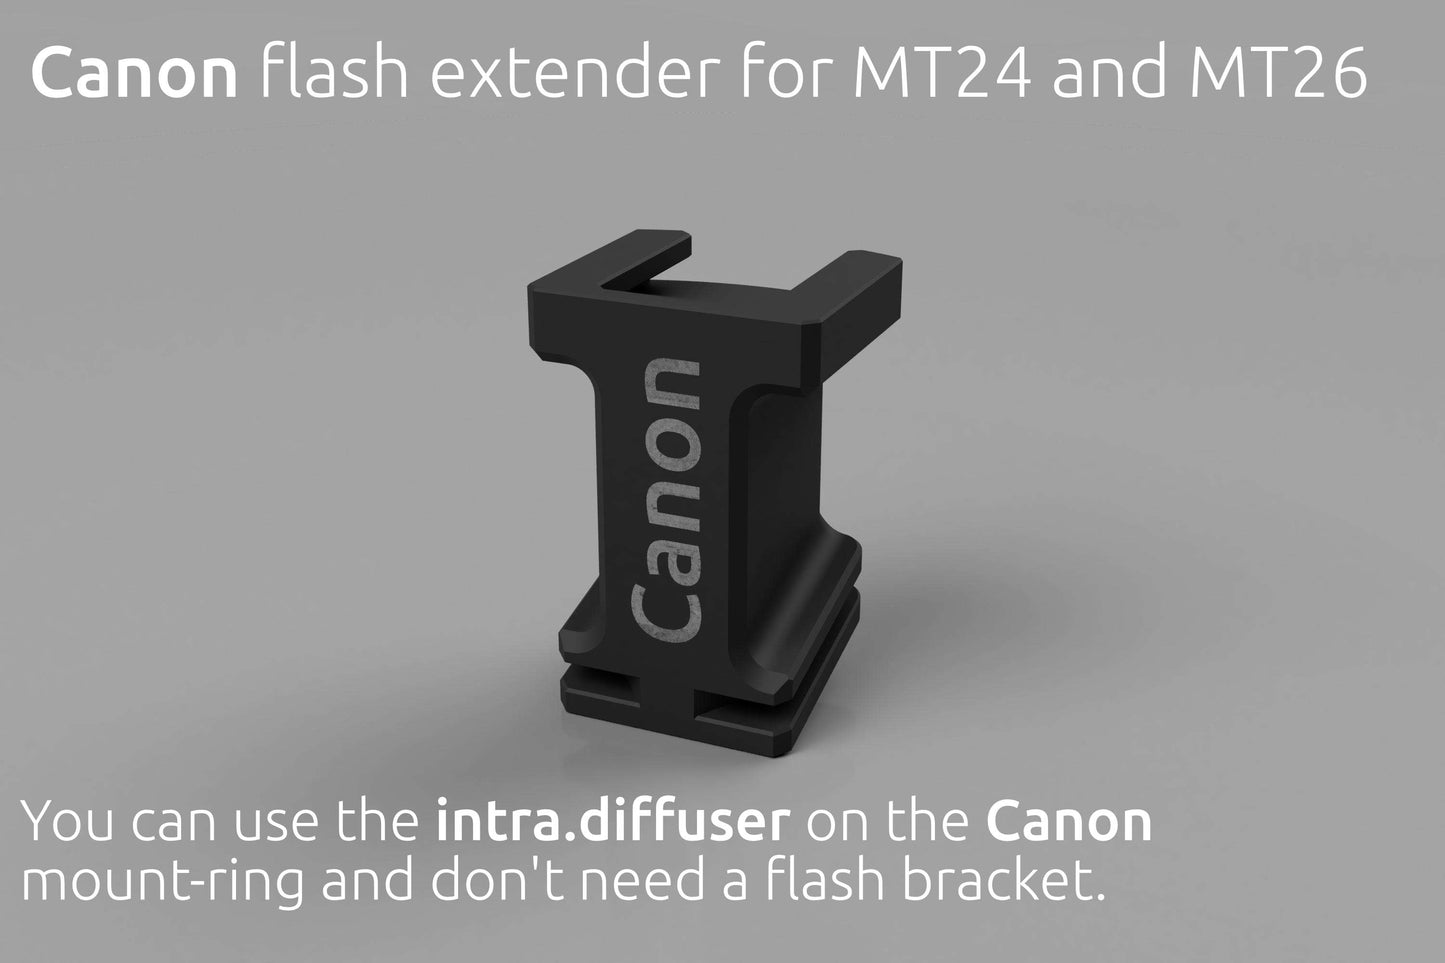 flash extenders (2 pieces)